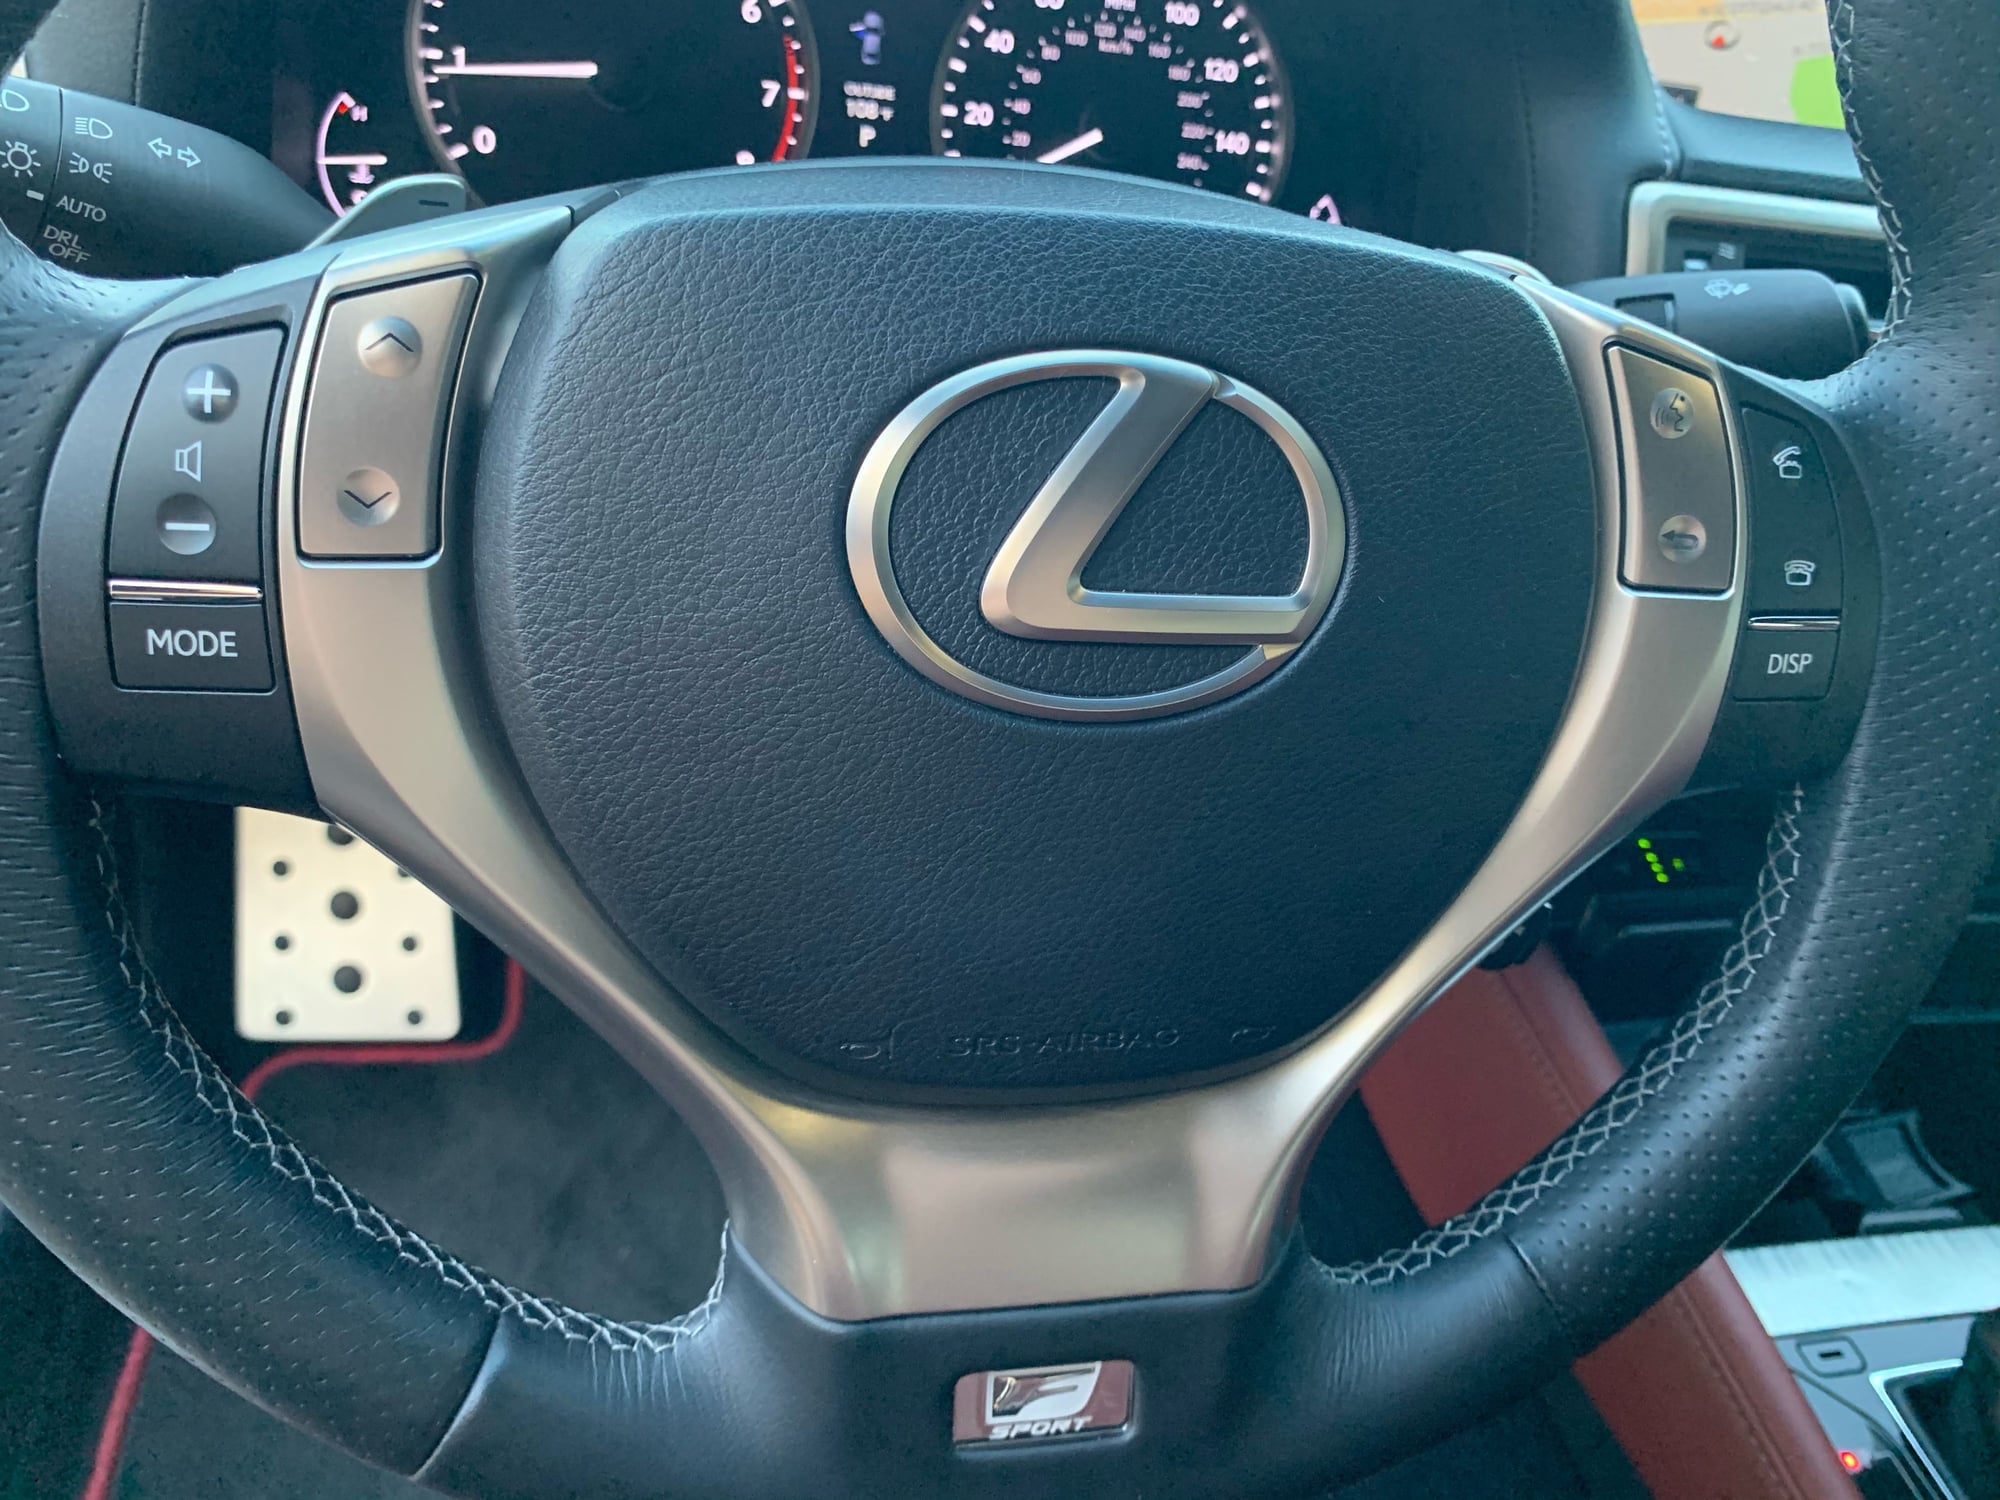 2015 Lexus GS350 - **MINT - 2015 Lexus GS350 F-Sport, Red Interior, Blackout Package** - Used - VIN JTHBE1BL5FA010905 - 43,000 Miles - 6 cyl - 2WD - Automatic - Sedan - Gray - Scottsdale, AZ 85255, United States